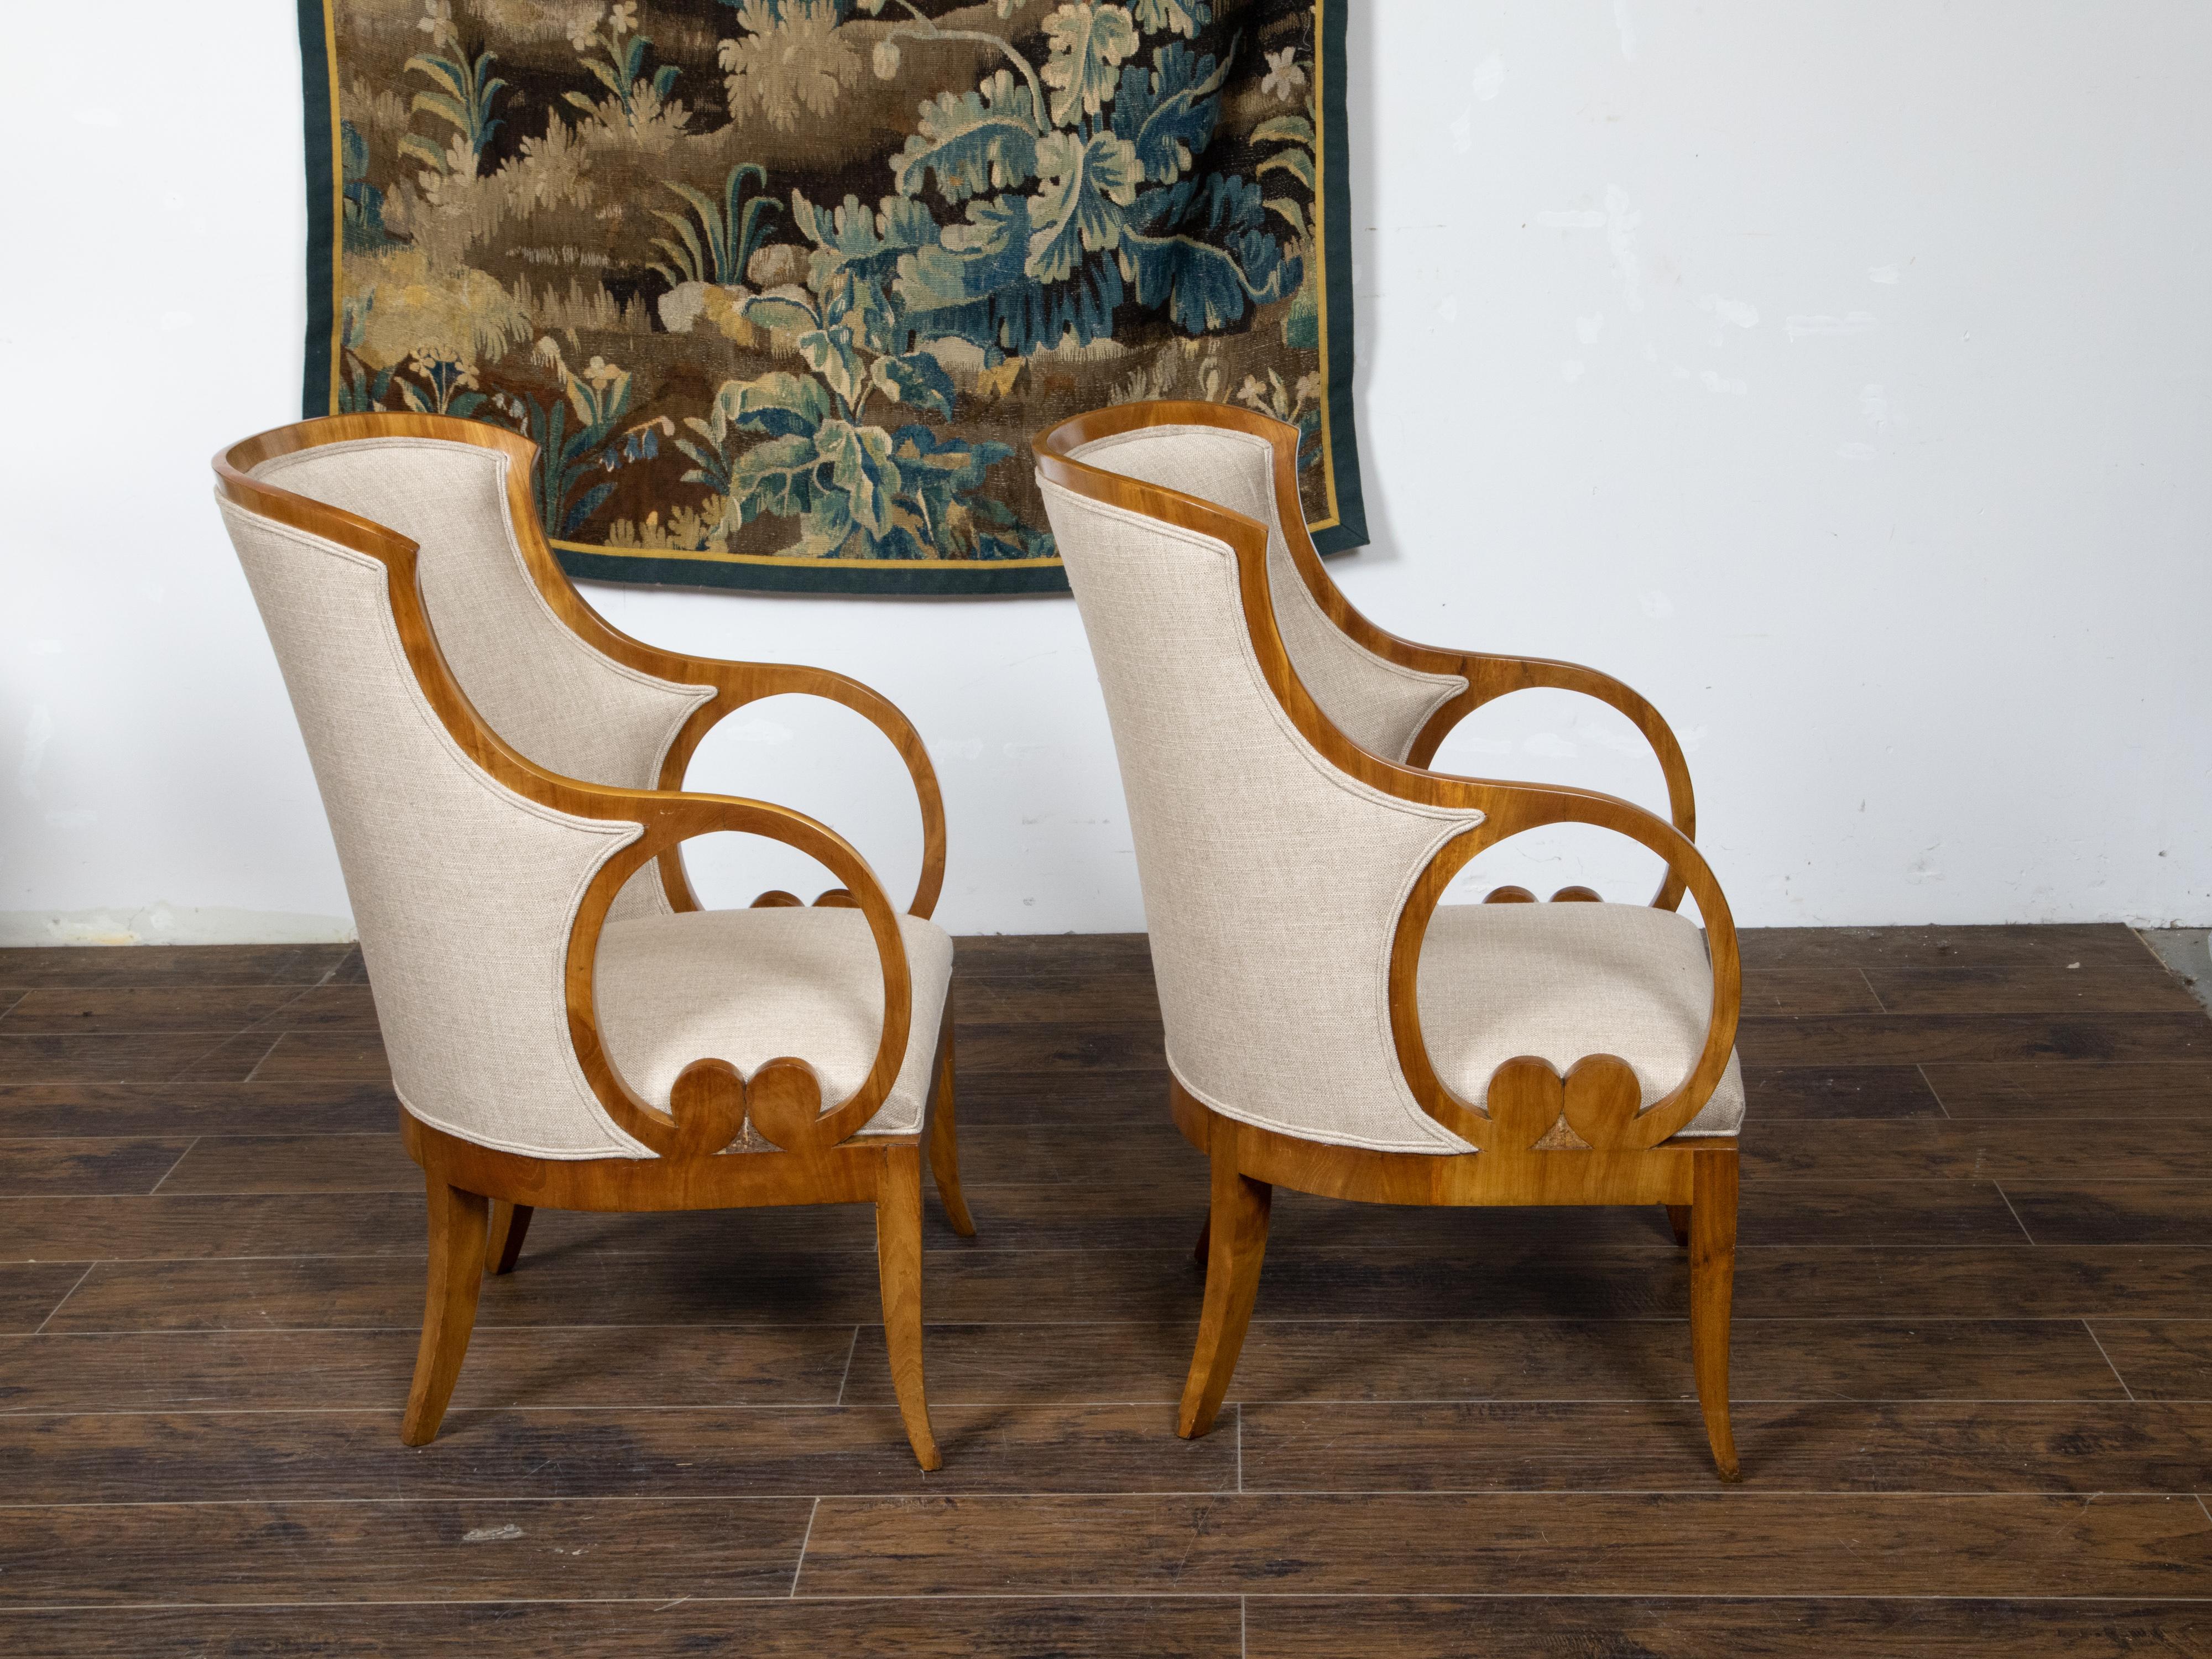 Pair of Austrian Biedermeier Period 19th Century Walnut Armchairs with Loop Arms For Sale 2